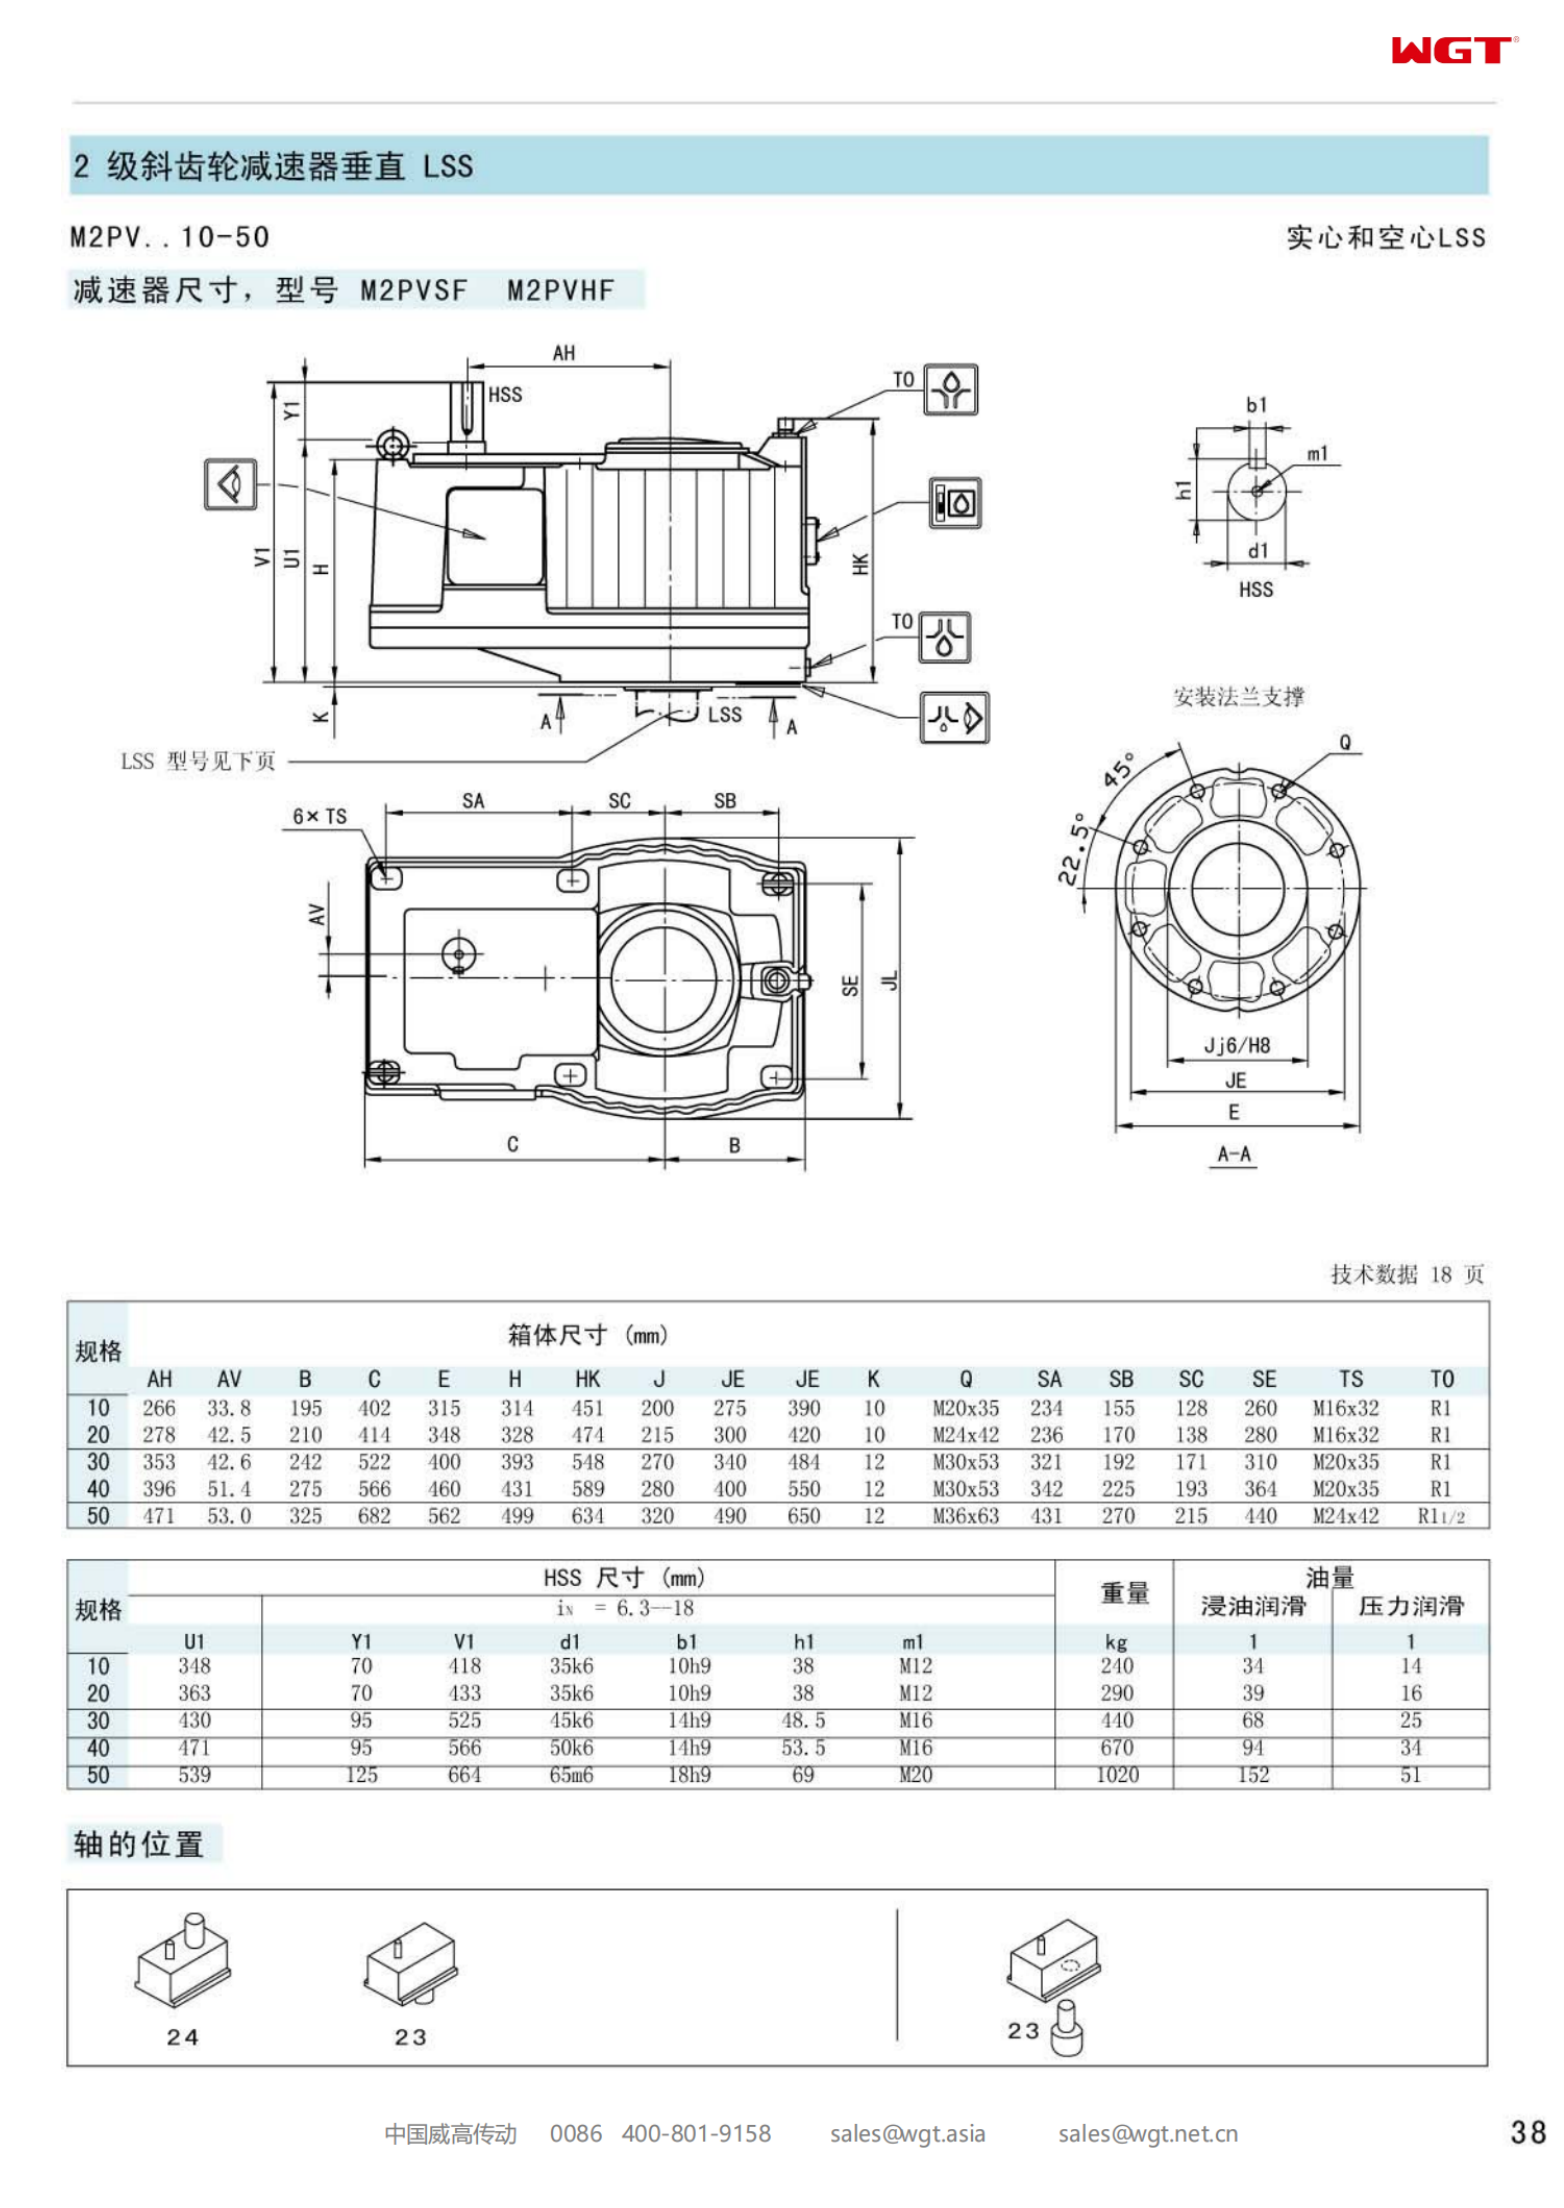 M2PVSF20 Replace_SEW_M_Series Gearbox